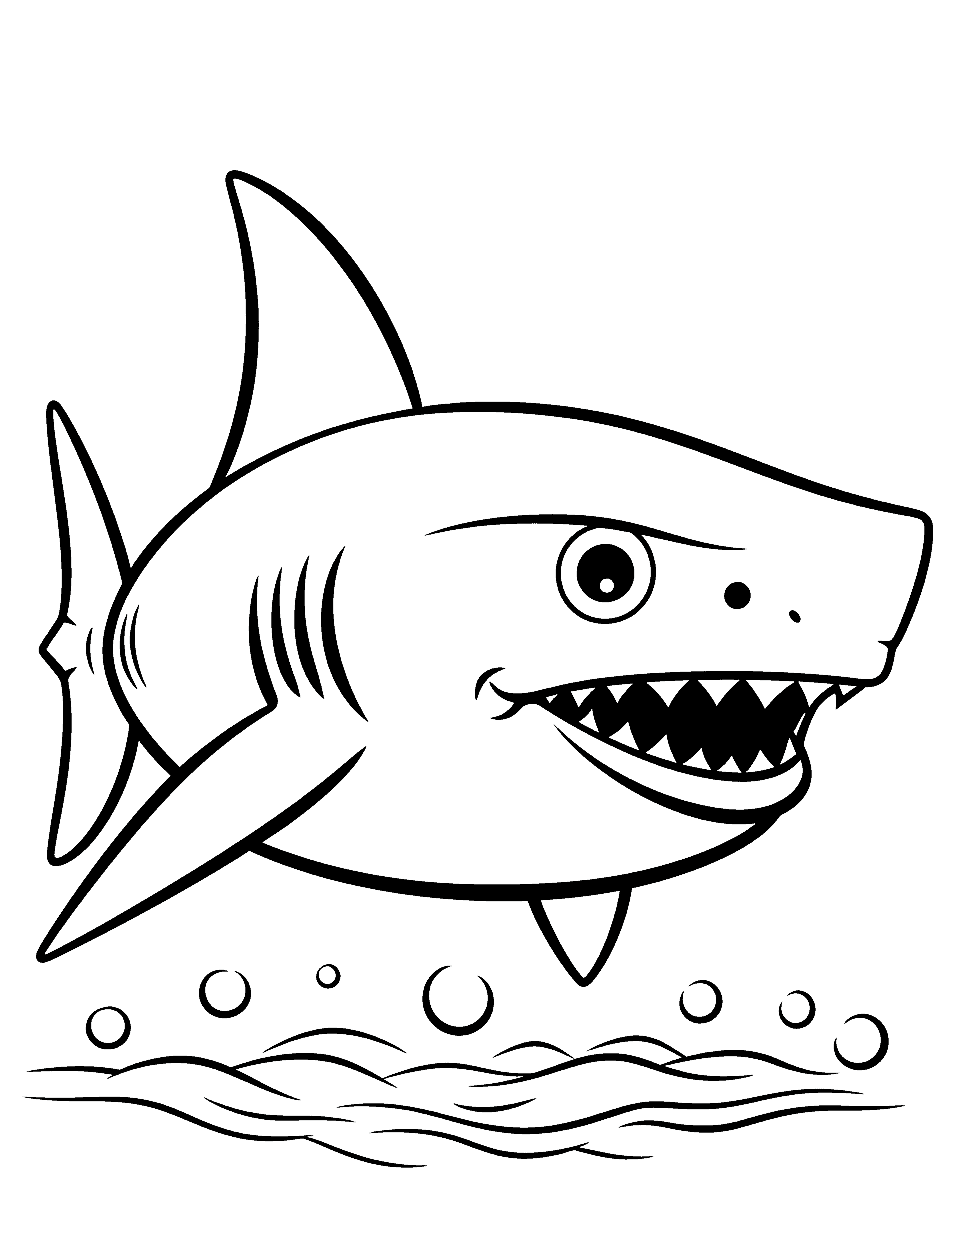 Easy Shark Outline Coloring Page - An easy-to-color shark outline, perfect for beginners.